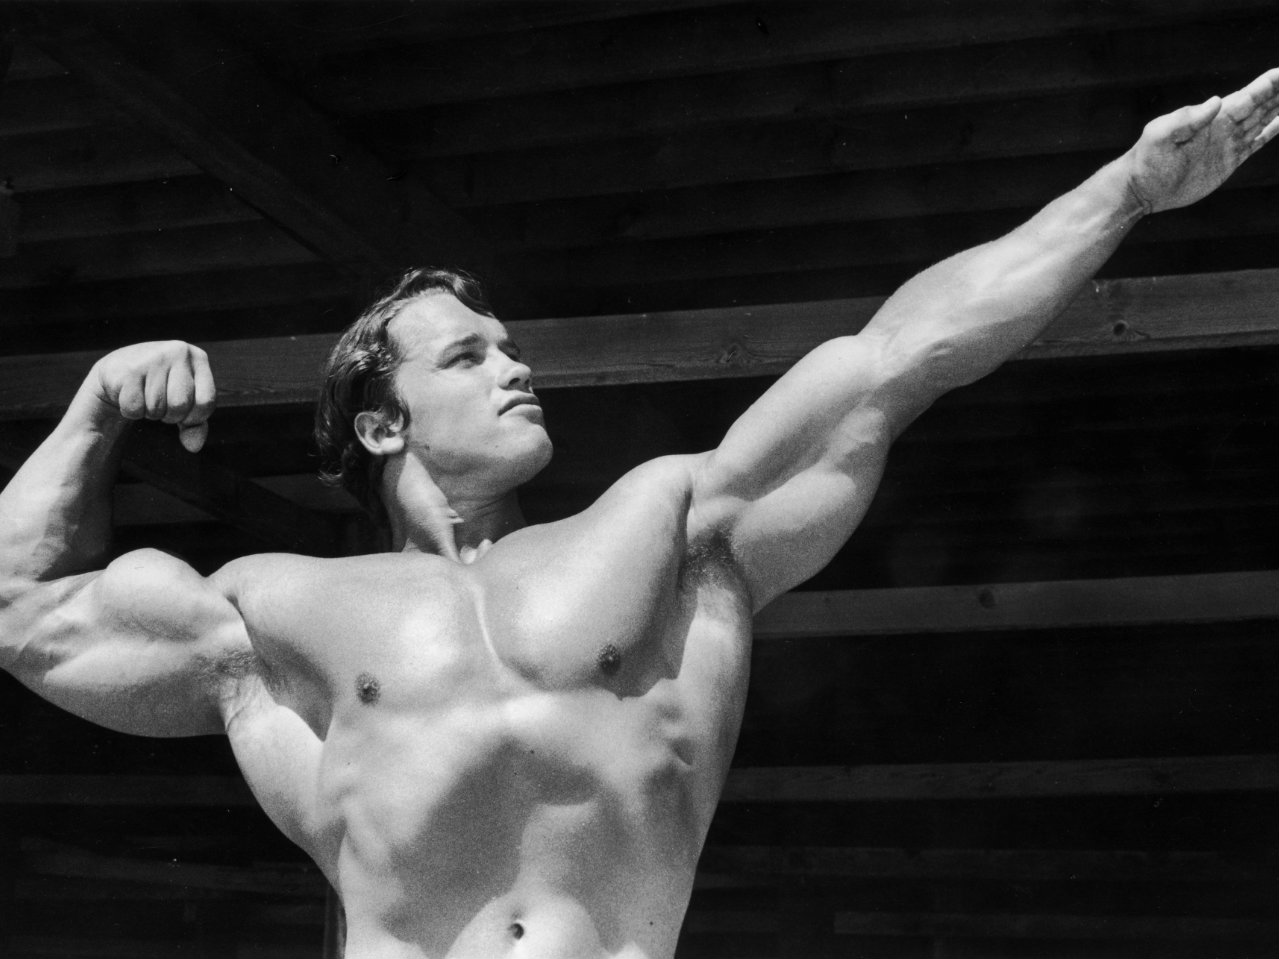 Get Superhero Jacked With This Epic Calisthenics Workout For Beginners